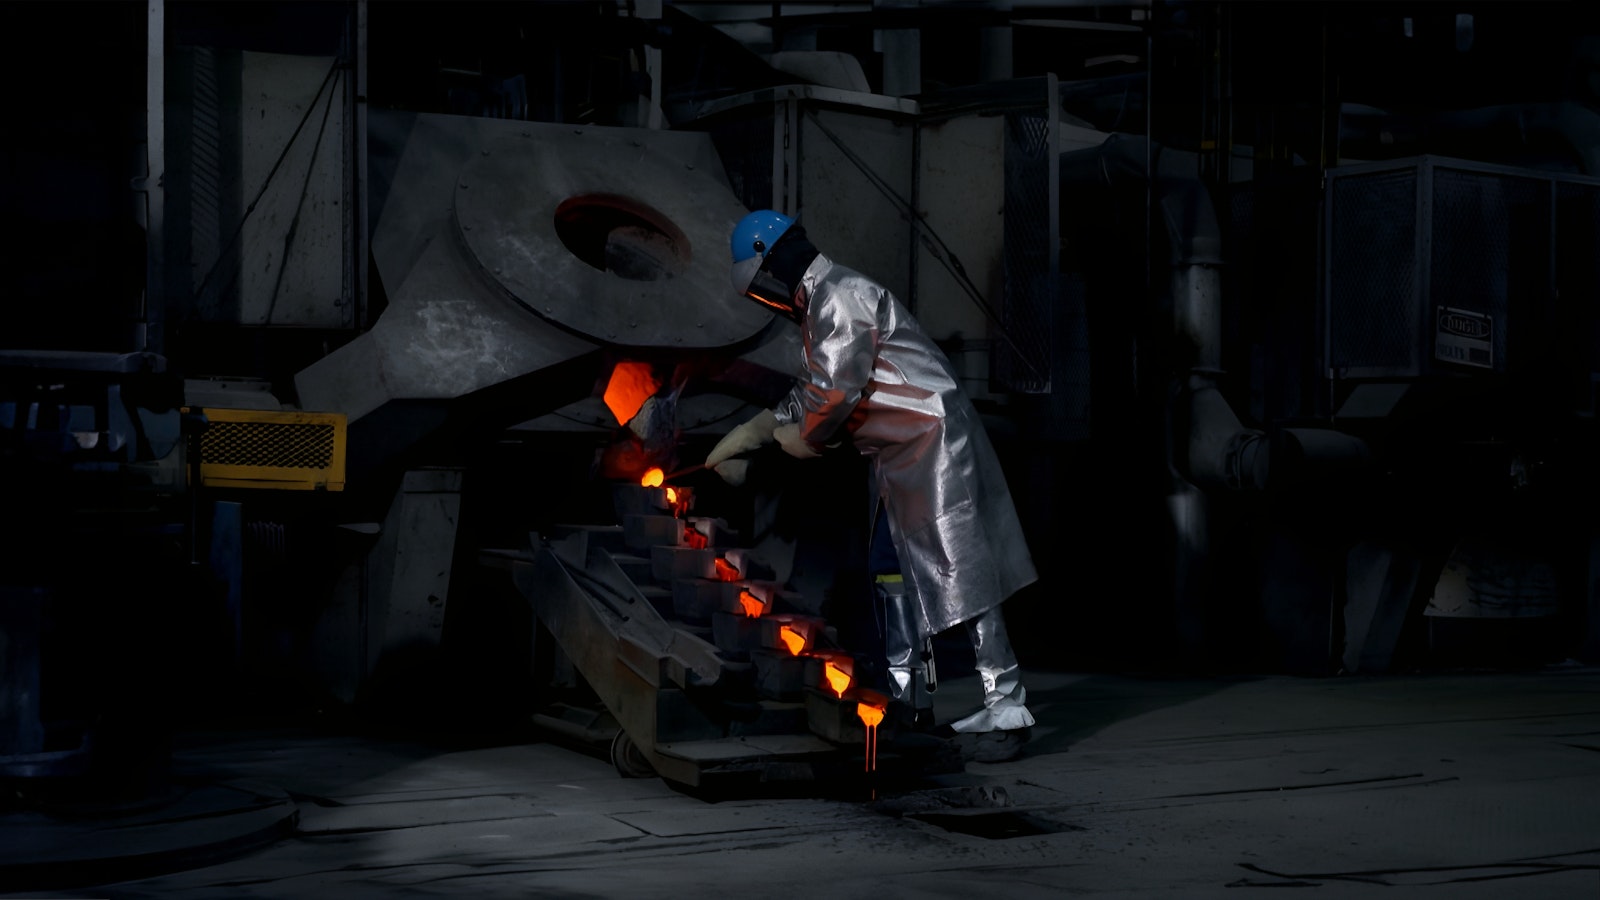 A miner, wearing silver, heat-reflective gear, arranges bar-shaped moulds at the mouth of a gold-smelting furnace.